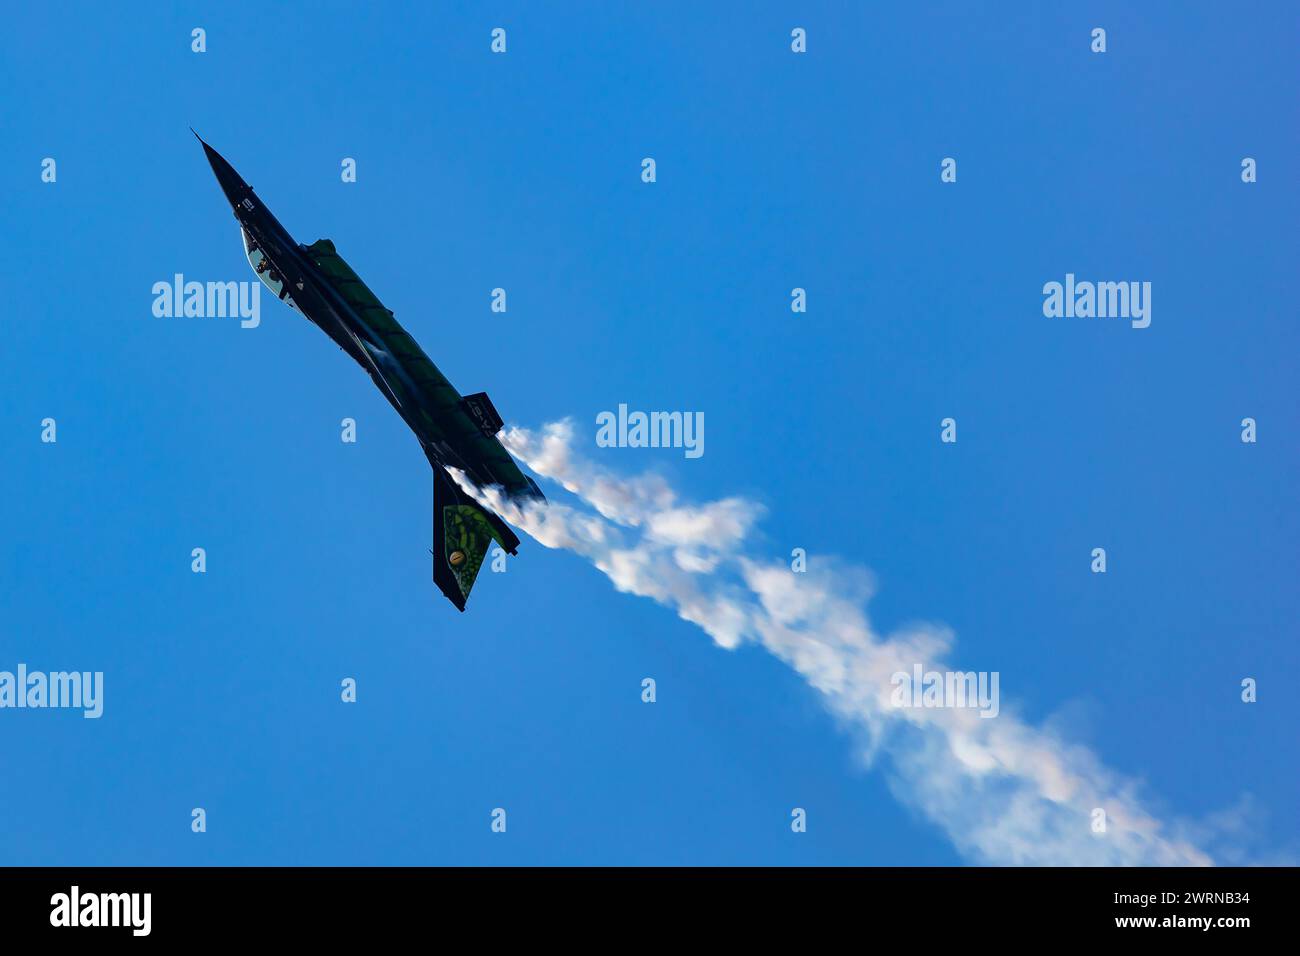 Radom, Poland - August 25, 2023: Belgian Air Force Lockheed F-16 Fighting Falcon fighter jet plane flying. Aviation and military aircraft. Stock Photo